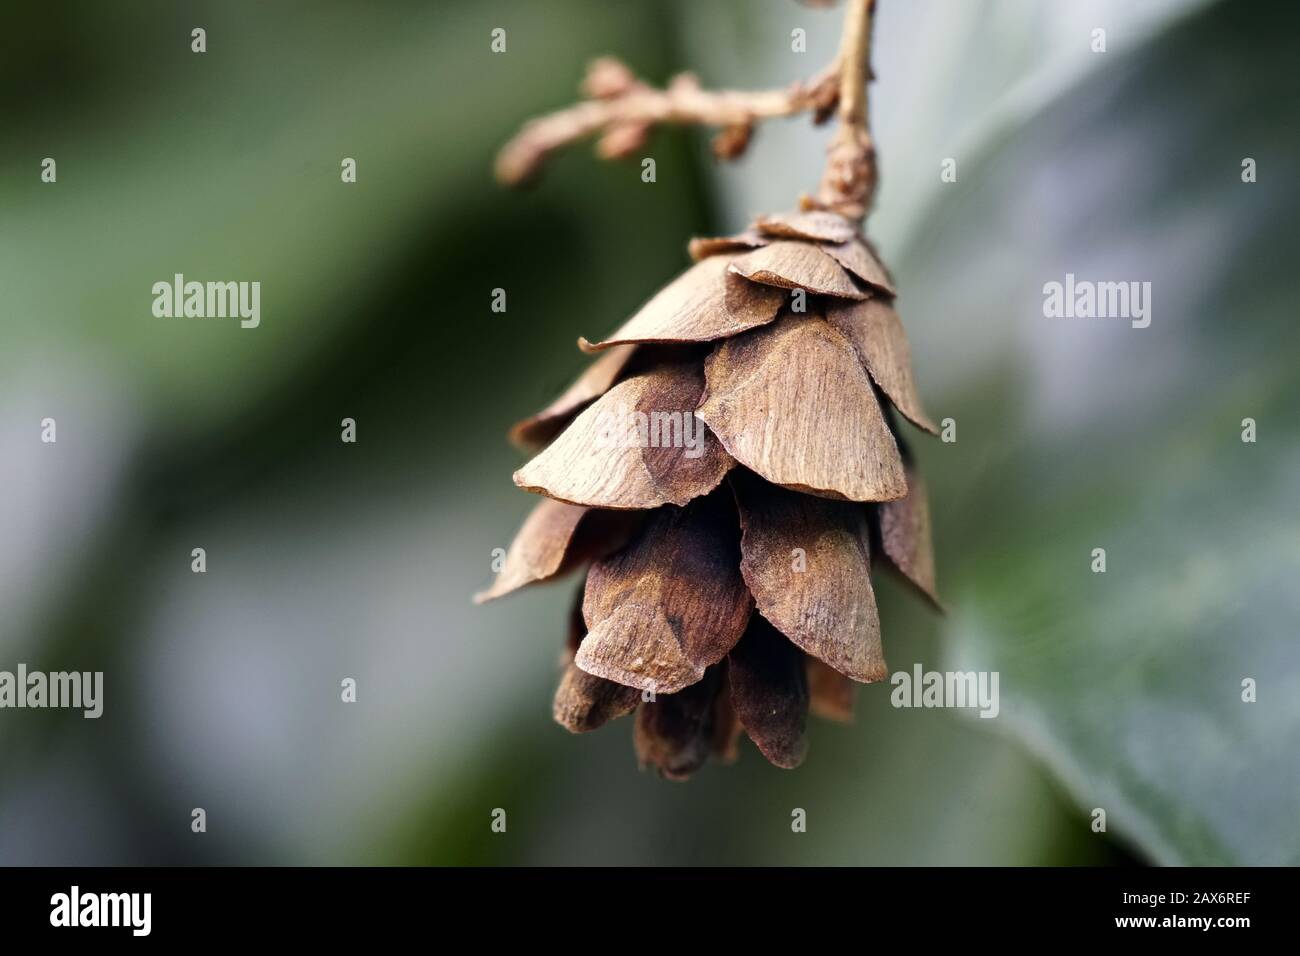 Soft focus shot of a weeping hemlock cone with green background Stock Photo